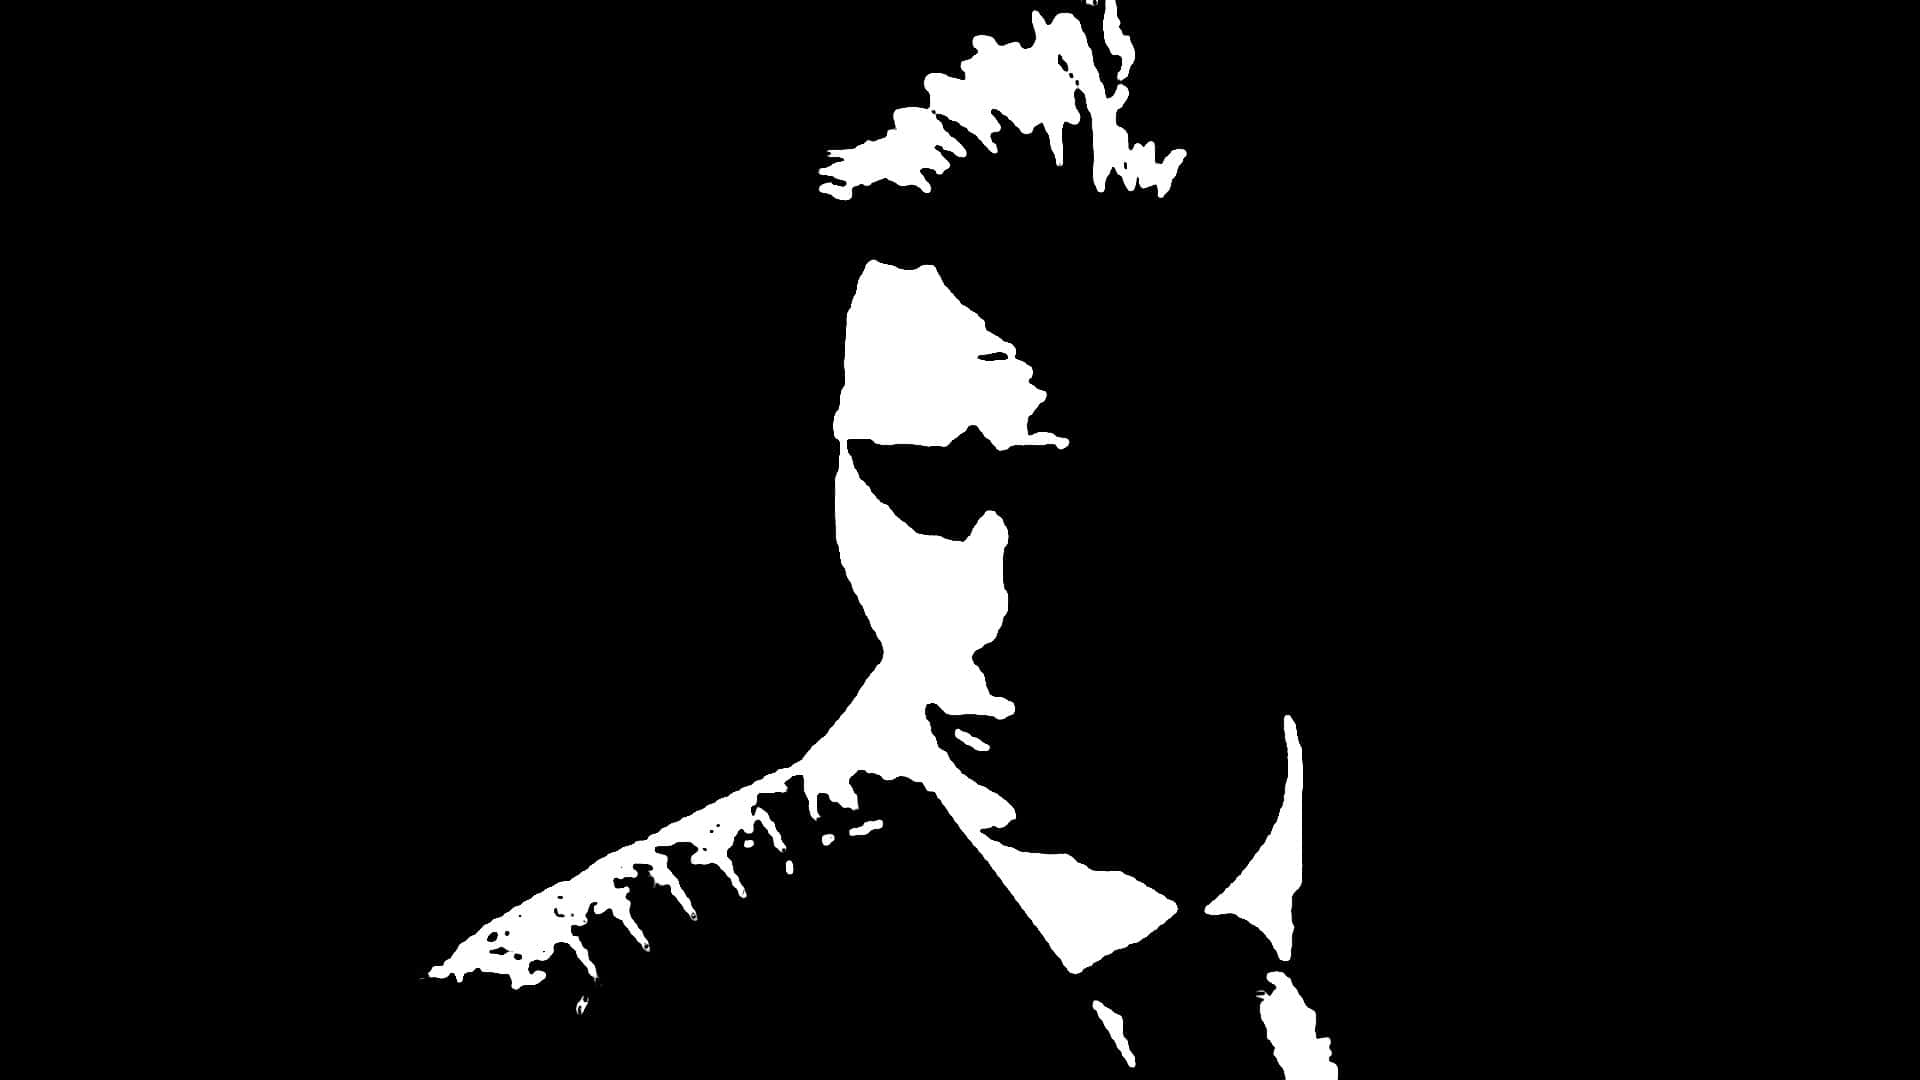 Iconic Movie Character Silhouette Background